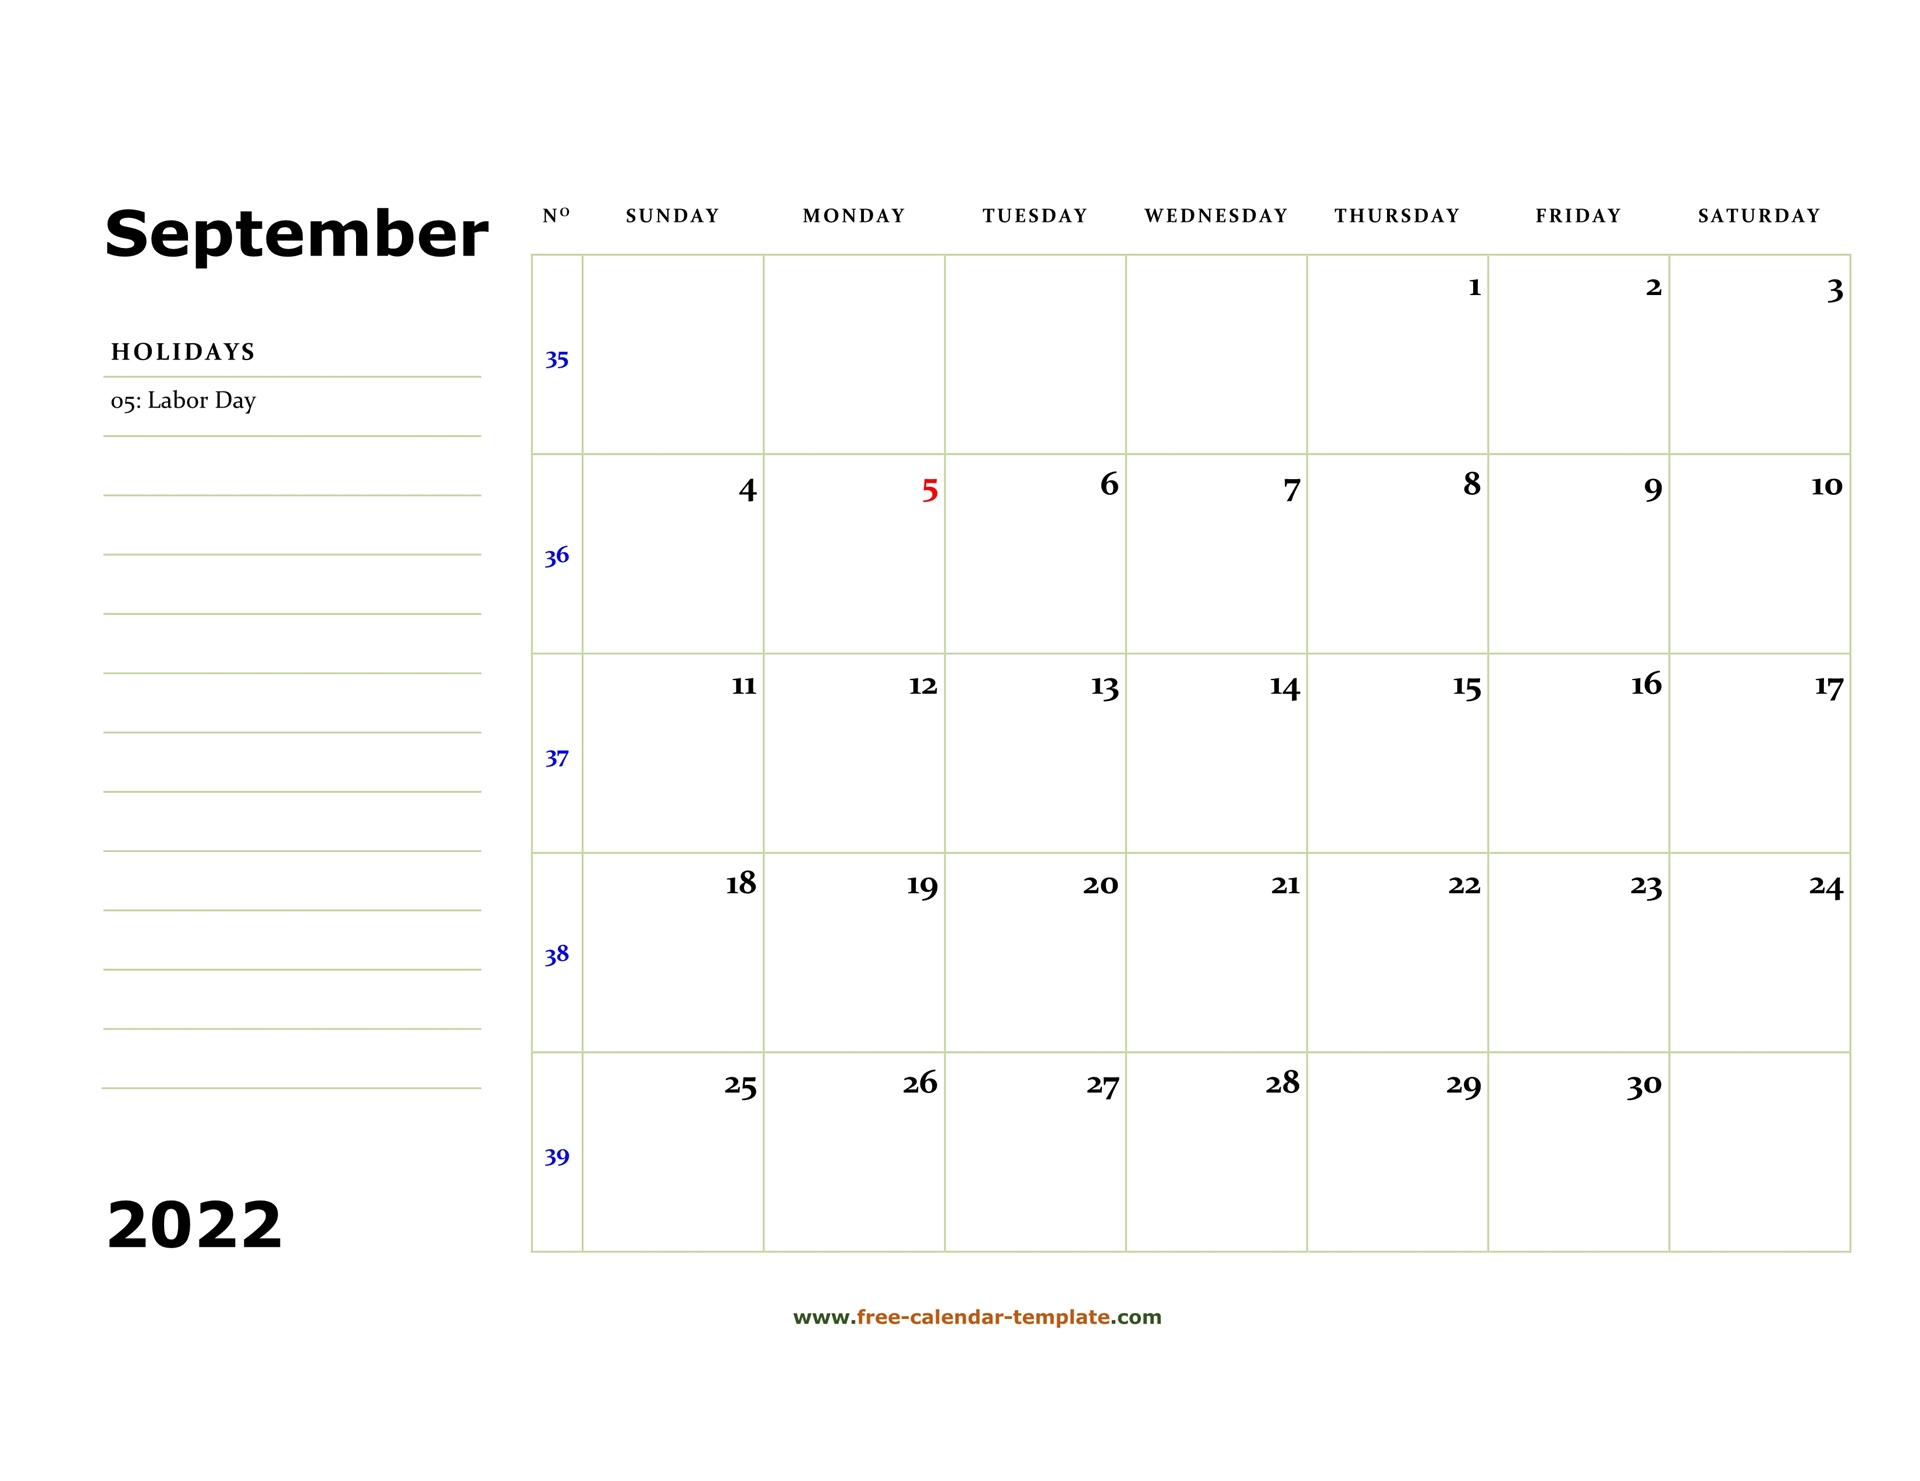 Collect 2022 October Calendar With Festivals